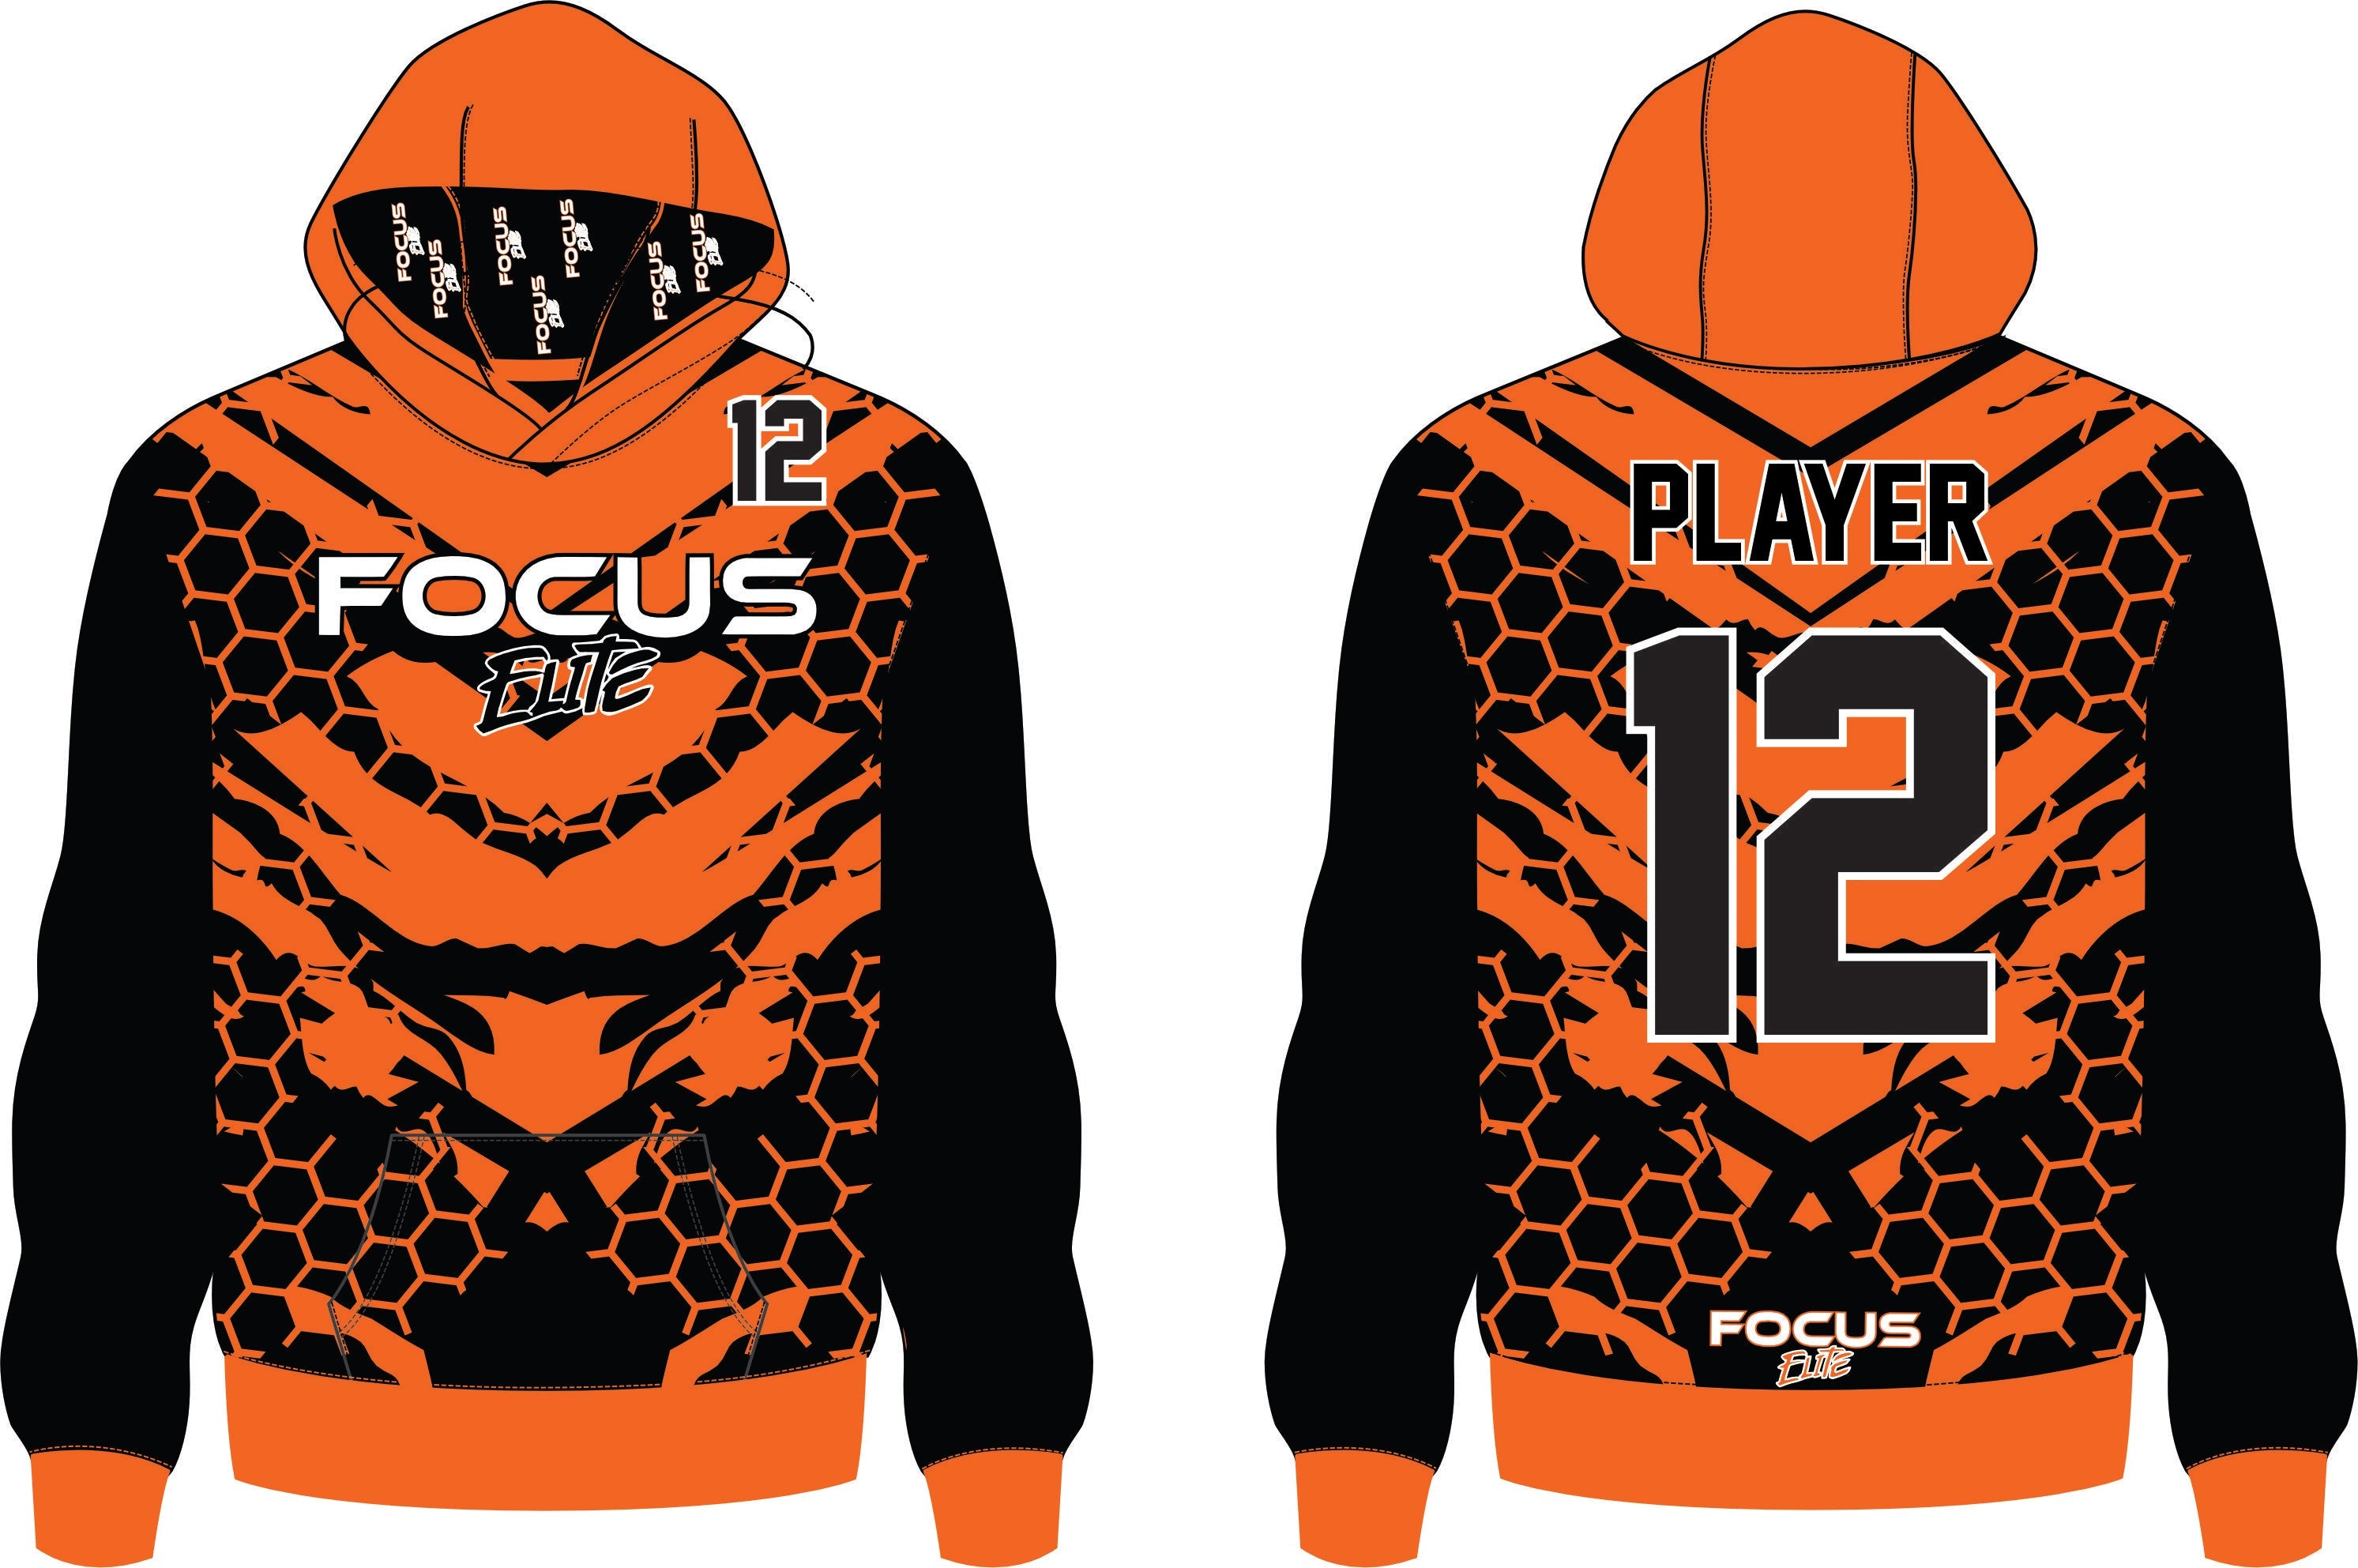 Focus Full Color LS Hooded shirts